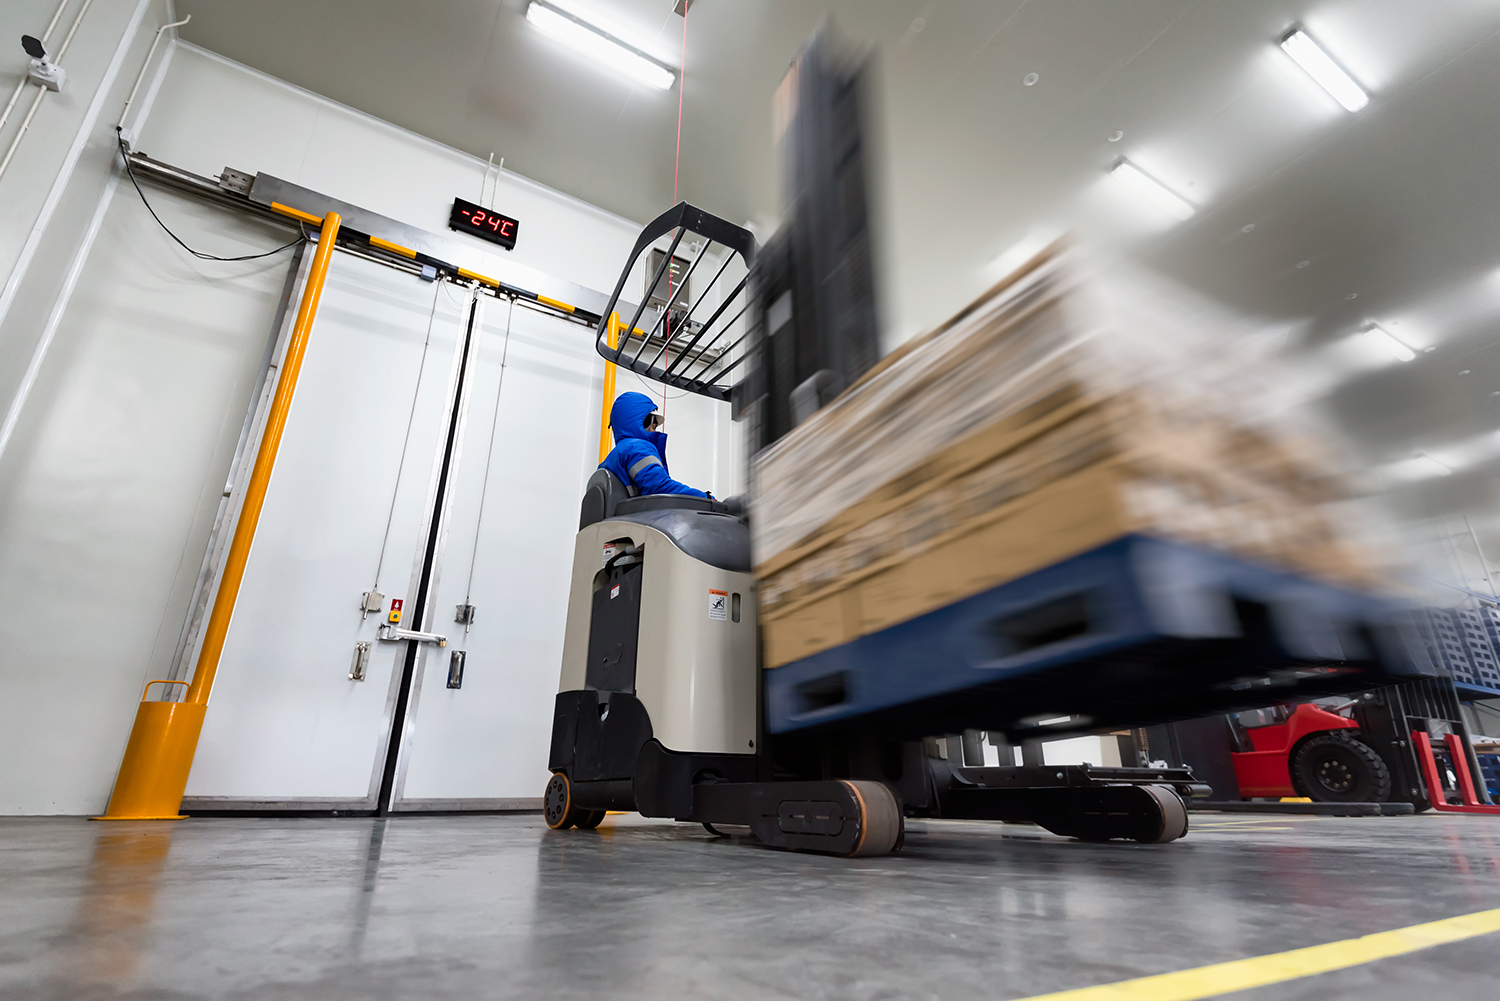 To ensure that forklift truck brakes can operate reliably in cold room environments, Warner Electric has developed custom brake friction material that provides consistent performance despite extreme temperature variance and the effects of moisture.